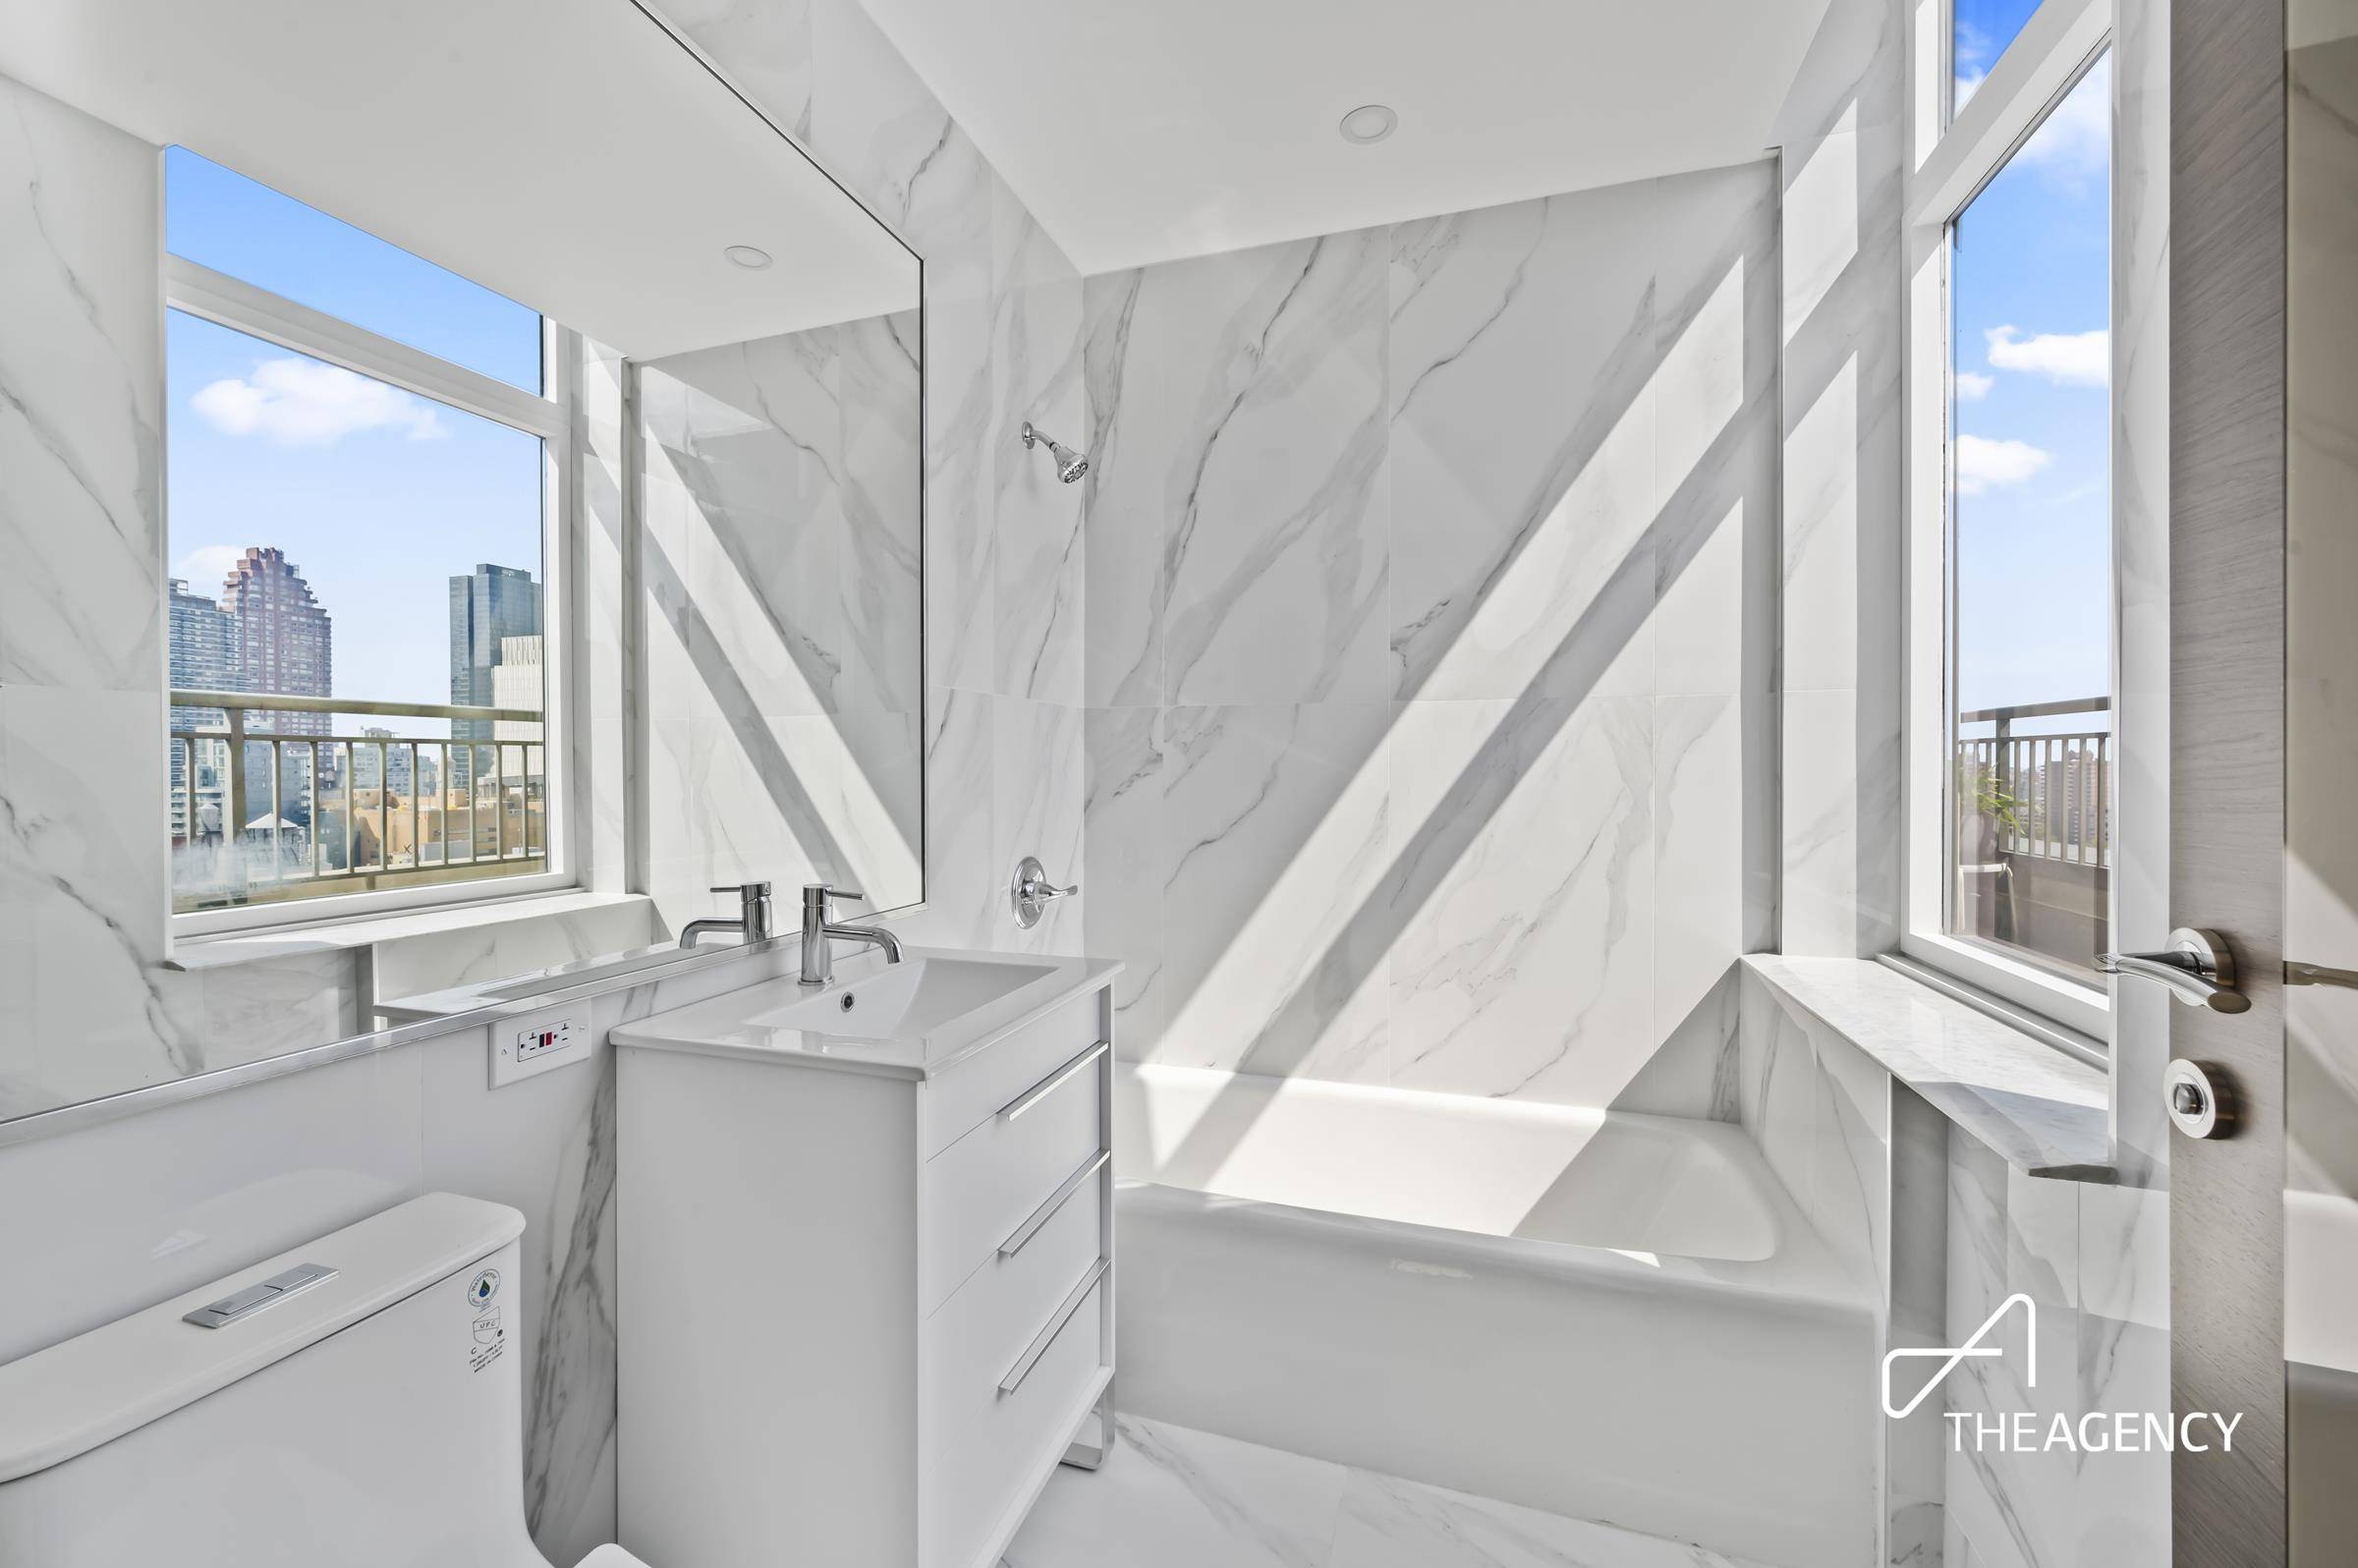 A truly rare find, this high floor, three bedroom, three bathroom, multi terraced home is located in one of the Upper East Side s most sought after, full service condominiums.